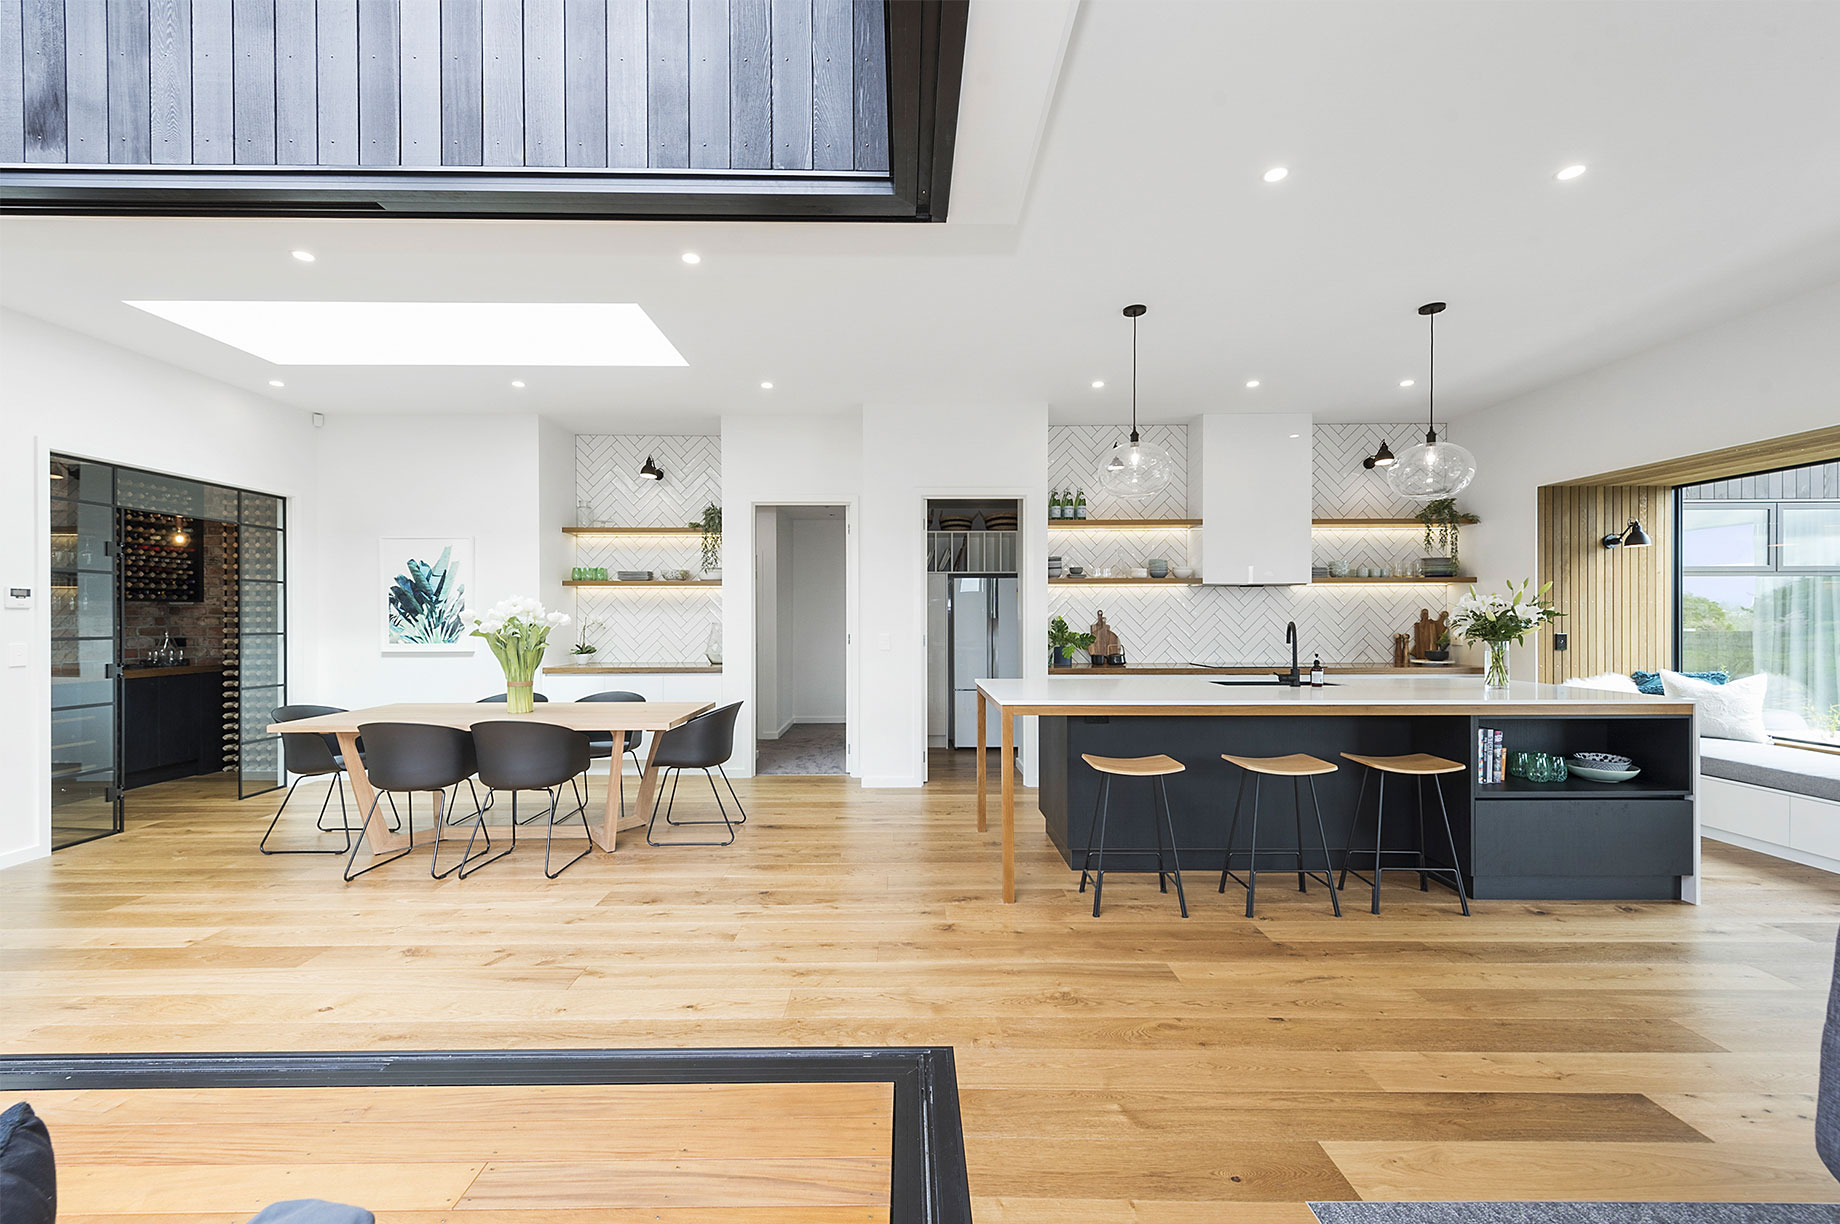 Waikato show home kitchen and dining interior